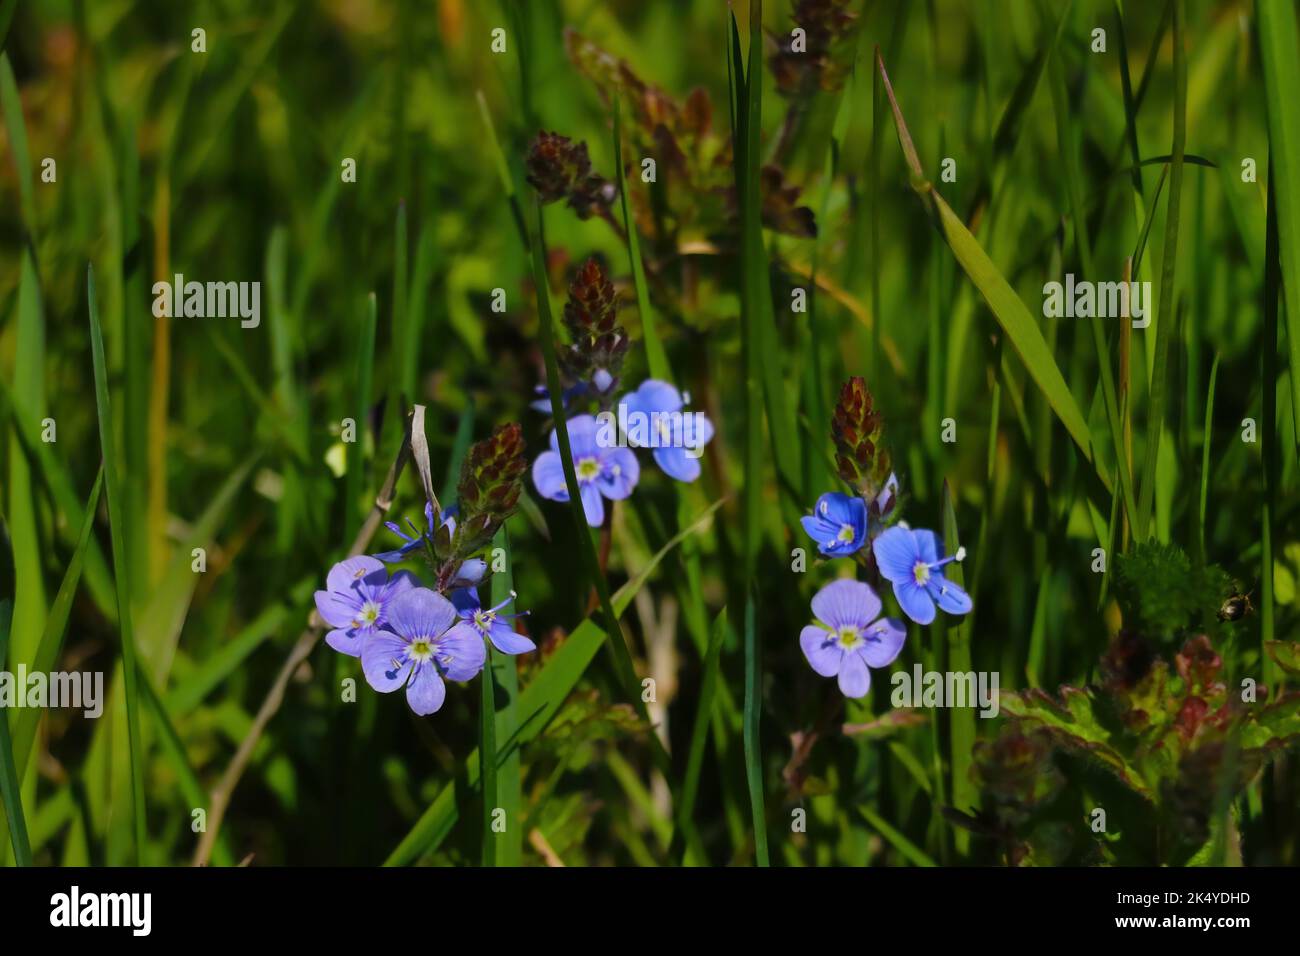 A closeup of a flowering commelina plant in a garden Stock Photo